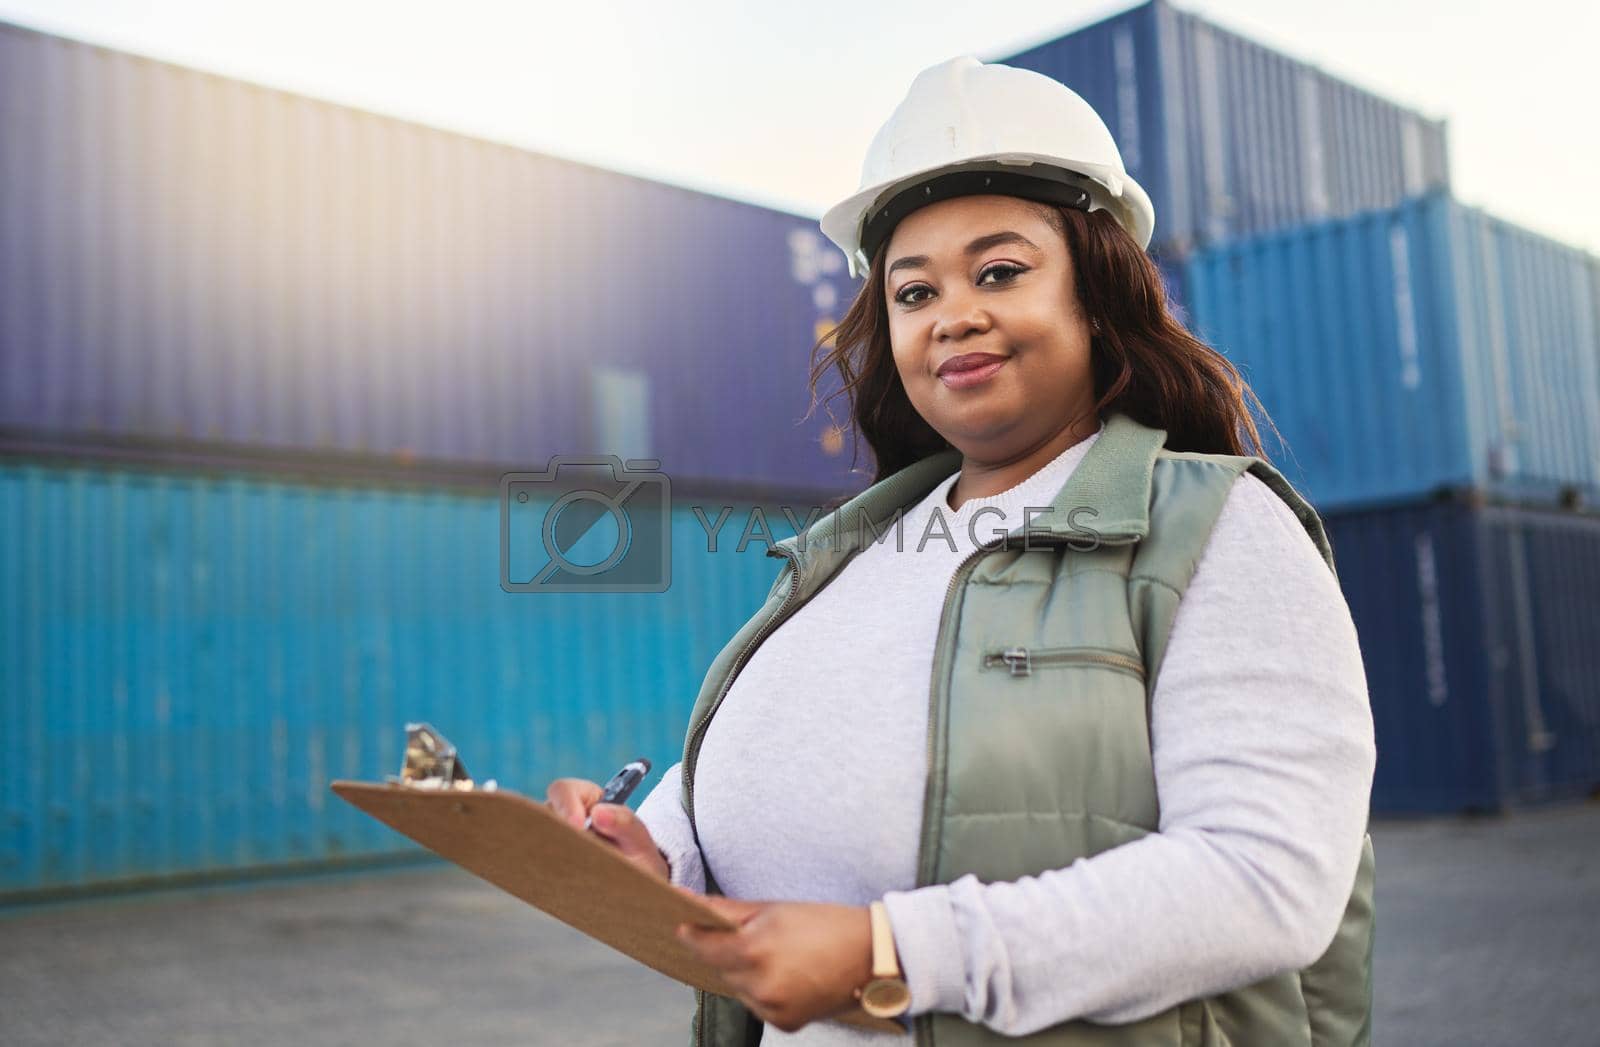 Royalty free image of Logistics, supply chain and shipping with a delivery woman working on a dock with documents on a clipboard and a container yard in the background. Stock, cargo and freight with a female export worker by YuriArcurs